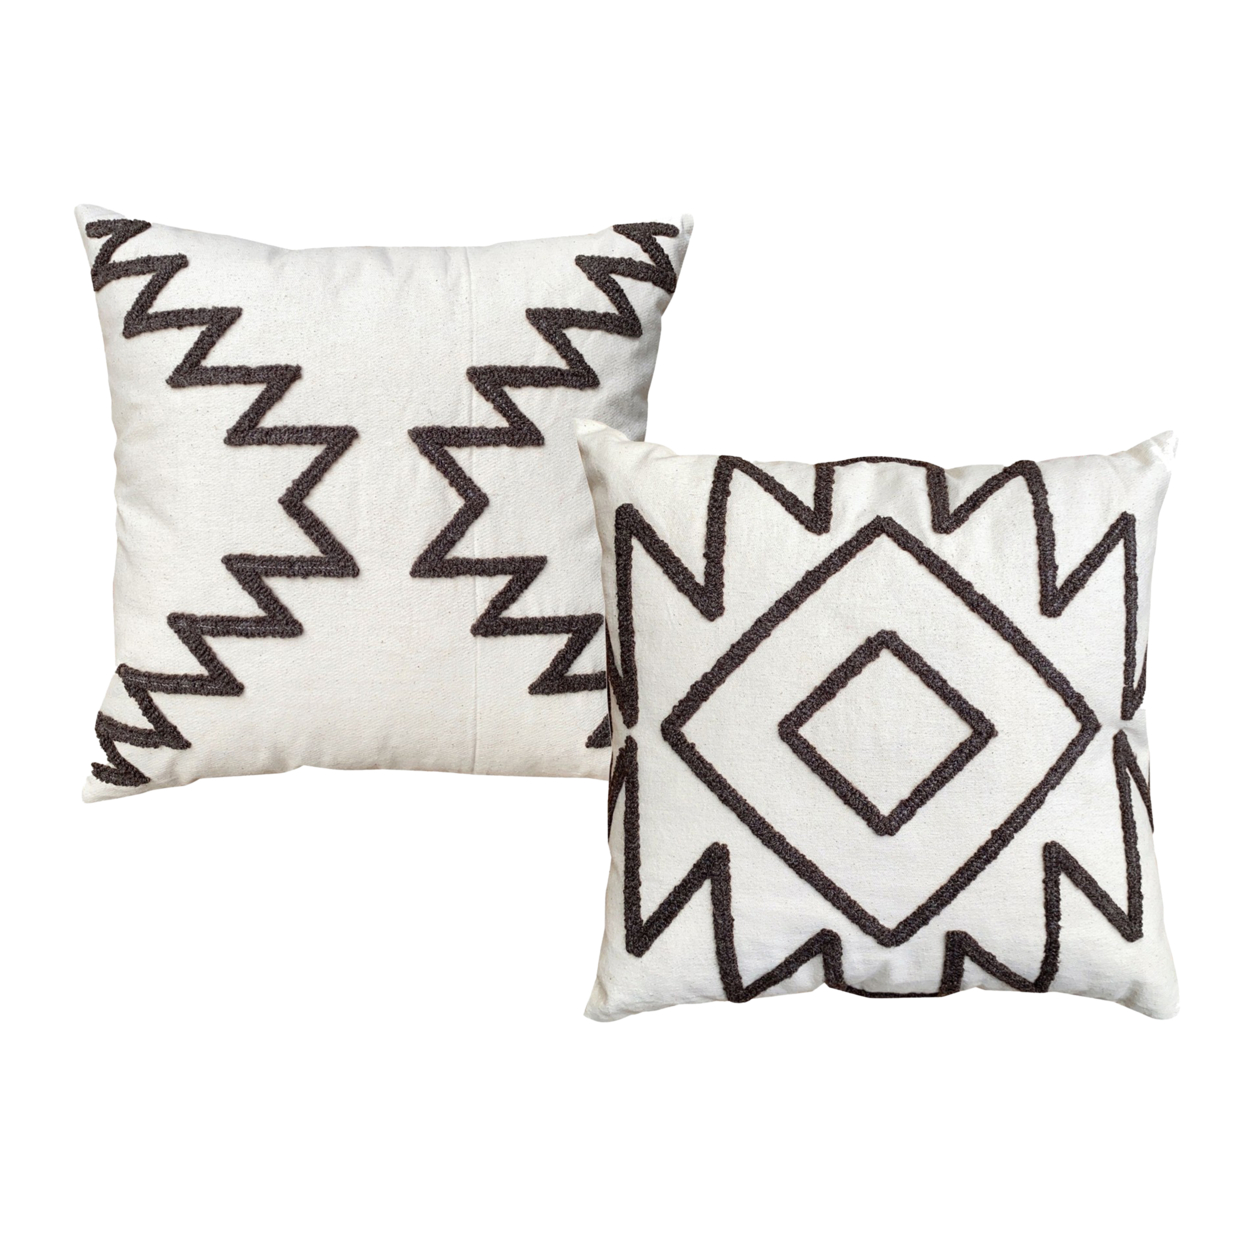 17 x 17 Inch Square Cotton Accent Throw Pillows Geometric Aztec Embroidery Set of 2 White Gray - Saltoro Sherpi - image 1 of 7